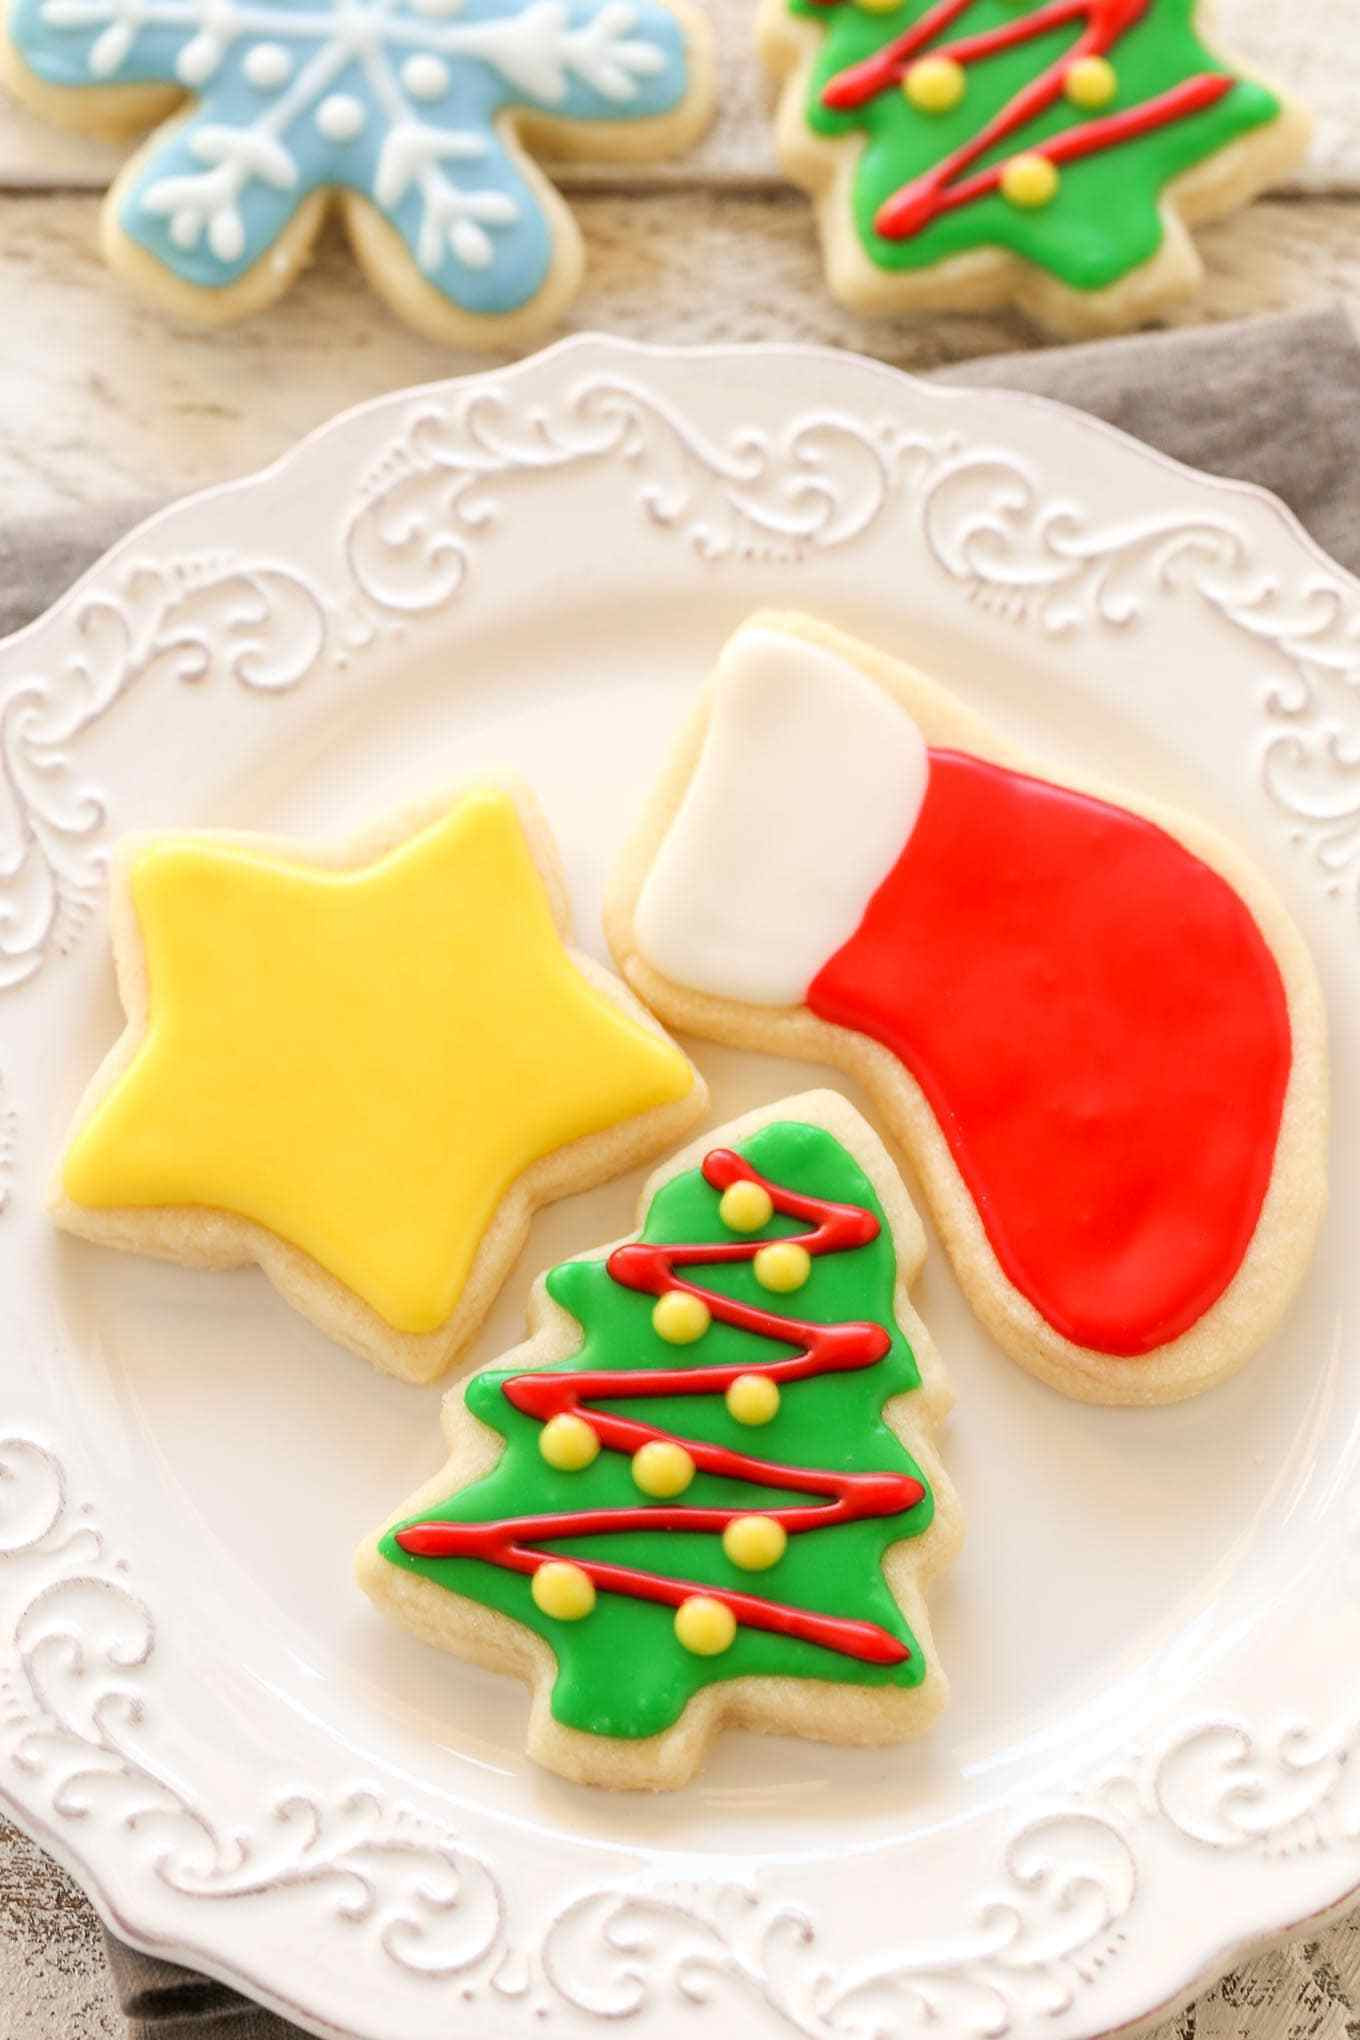 Cutout Christmas Cookies
 Soft Christmas Cut Out Sugar Cookies Live Well Bake ten